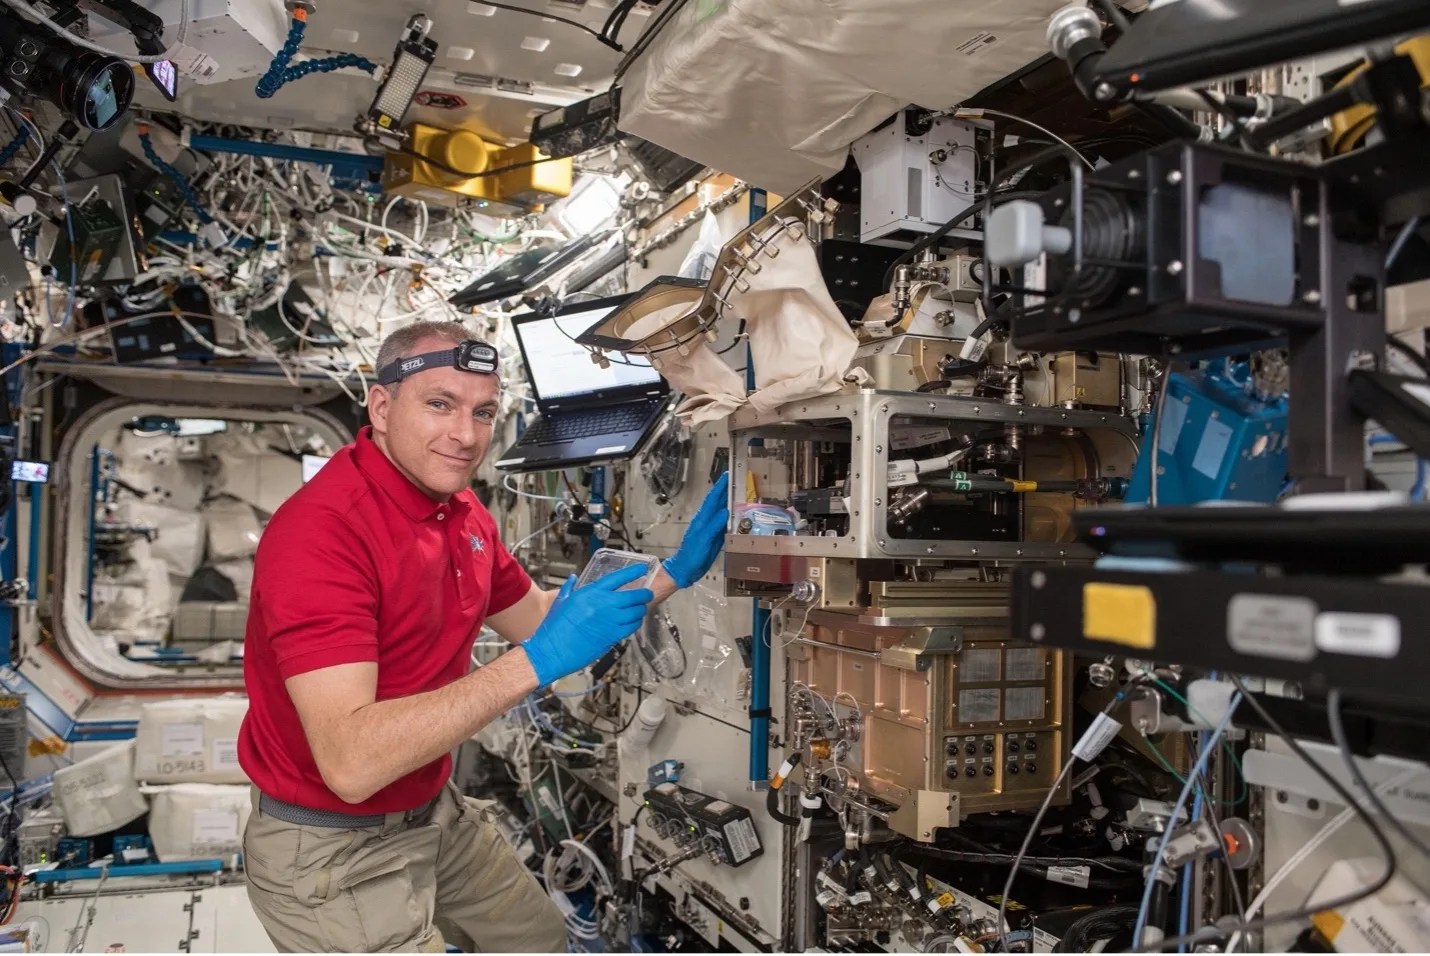 Astronaut surrounded by wires and mechanical devices within the space station. He’s wearing blue latex gloves while handling a transparent flat device in his right hand and holding onto a rectangular metal frame attached to the wall.